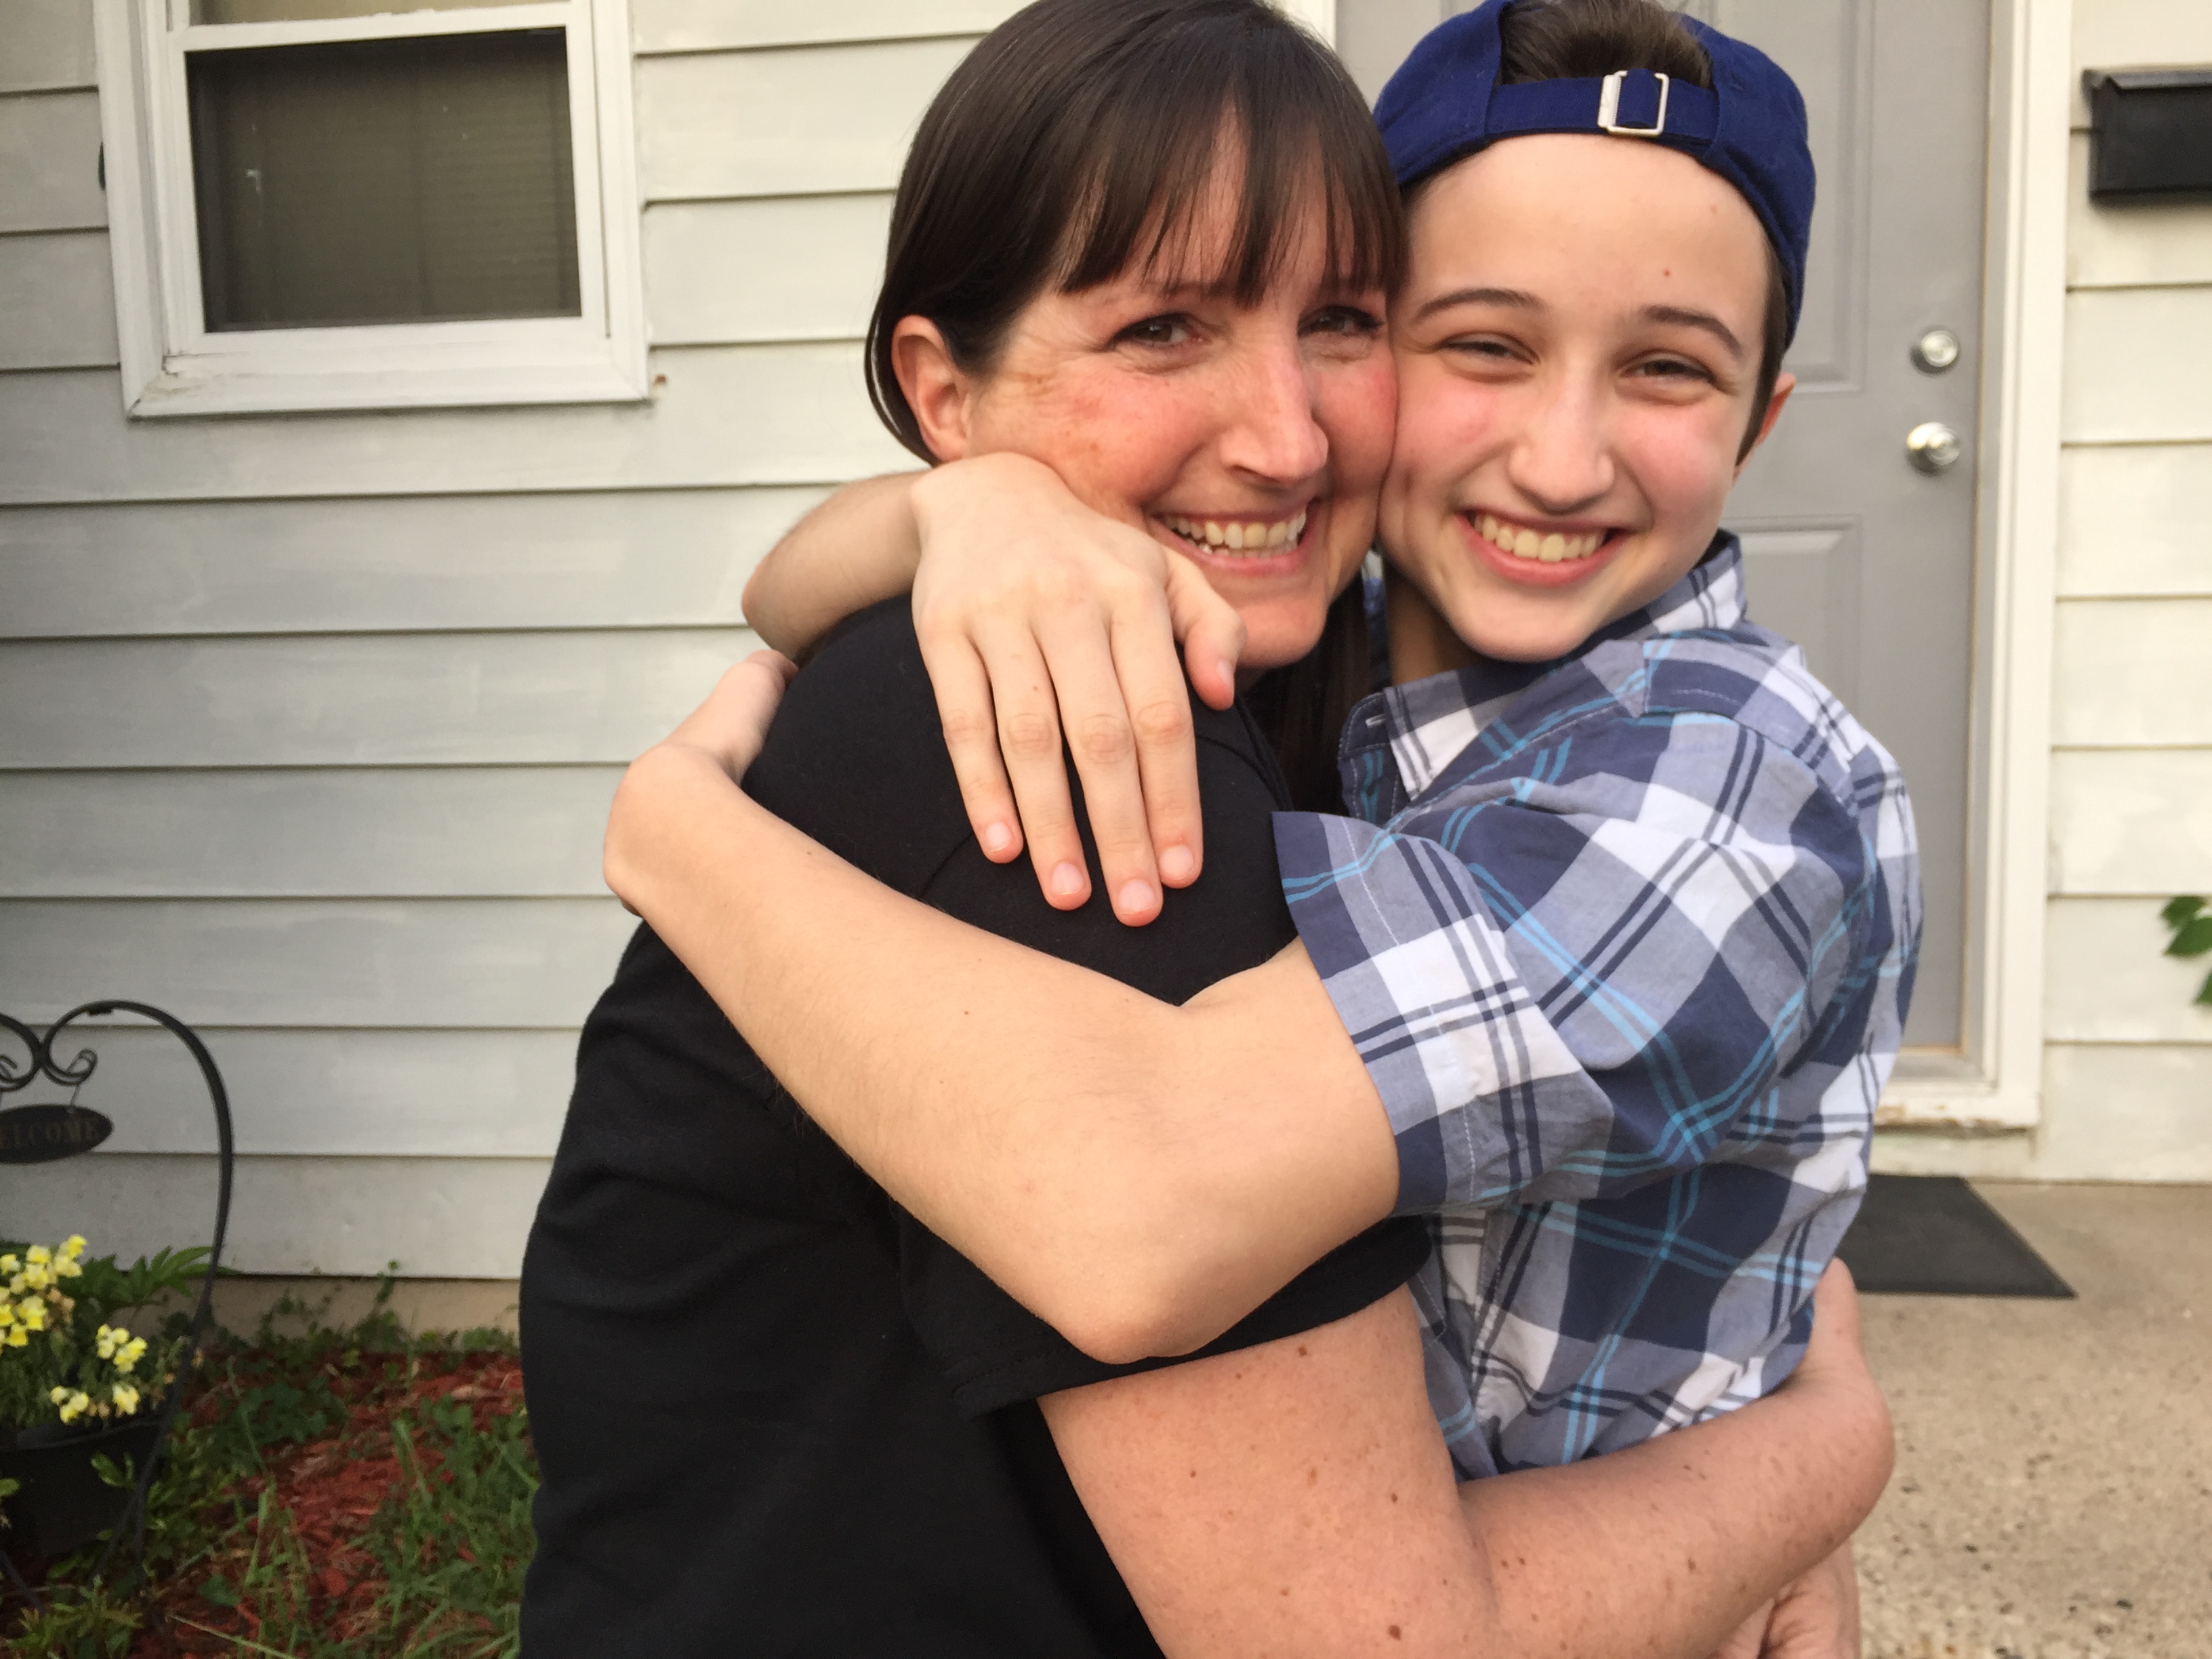 Wisconsin school district to settle discrimination case with transgender student Ash Whitaker